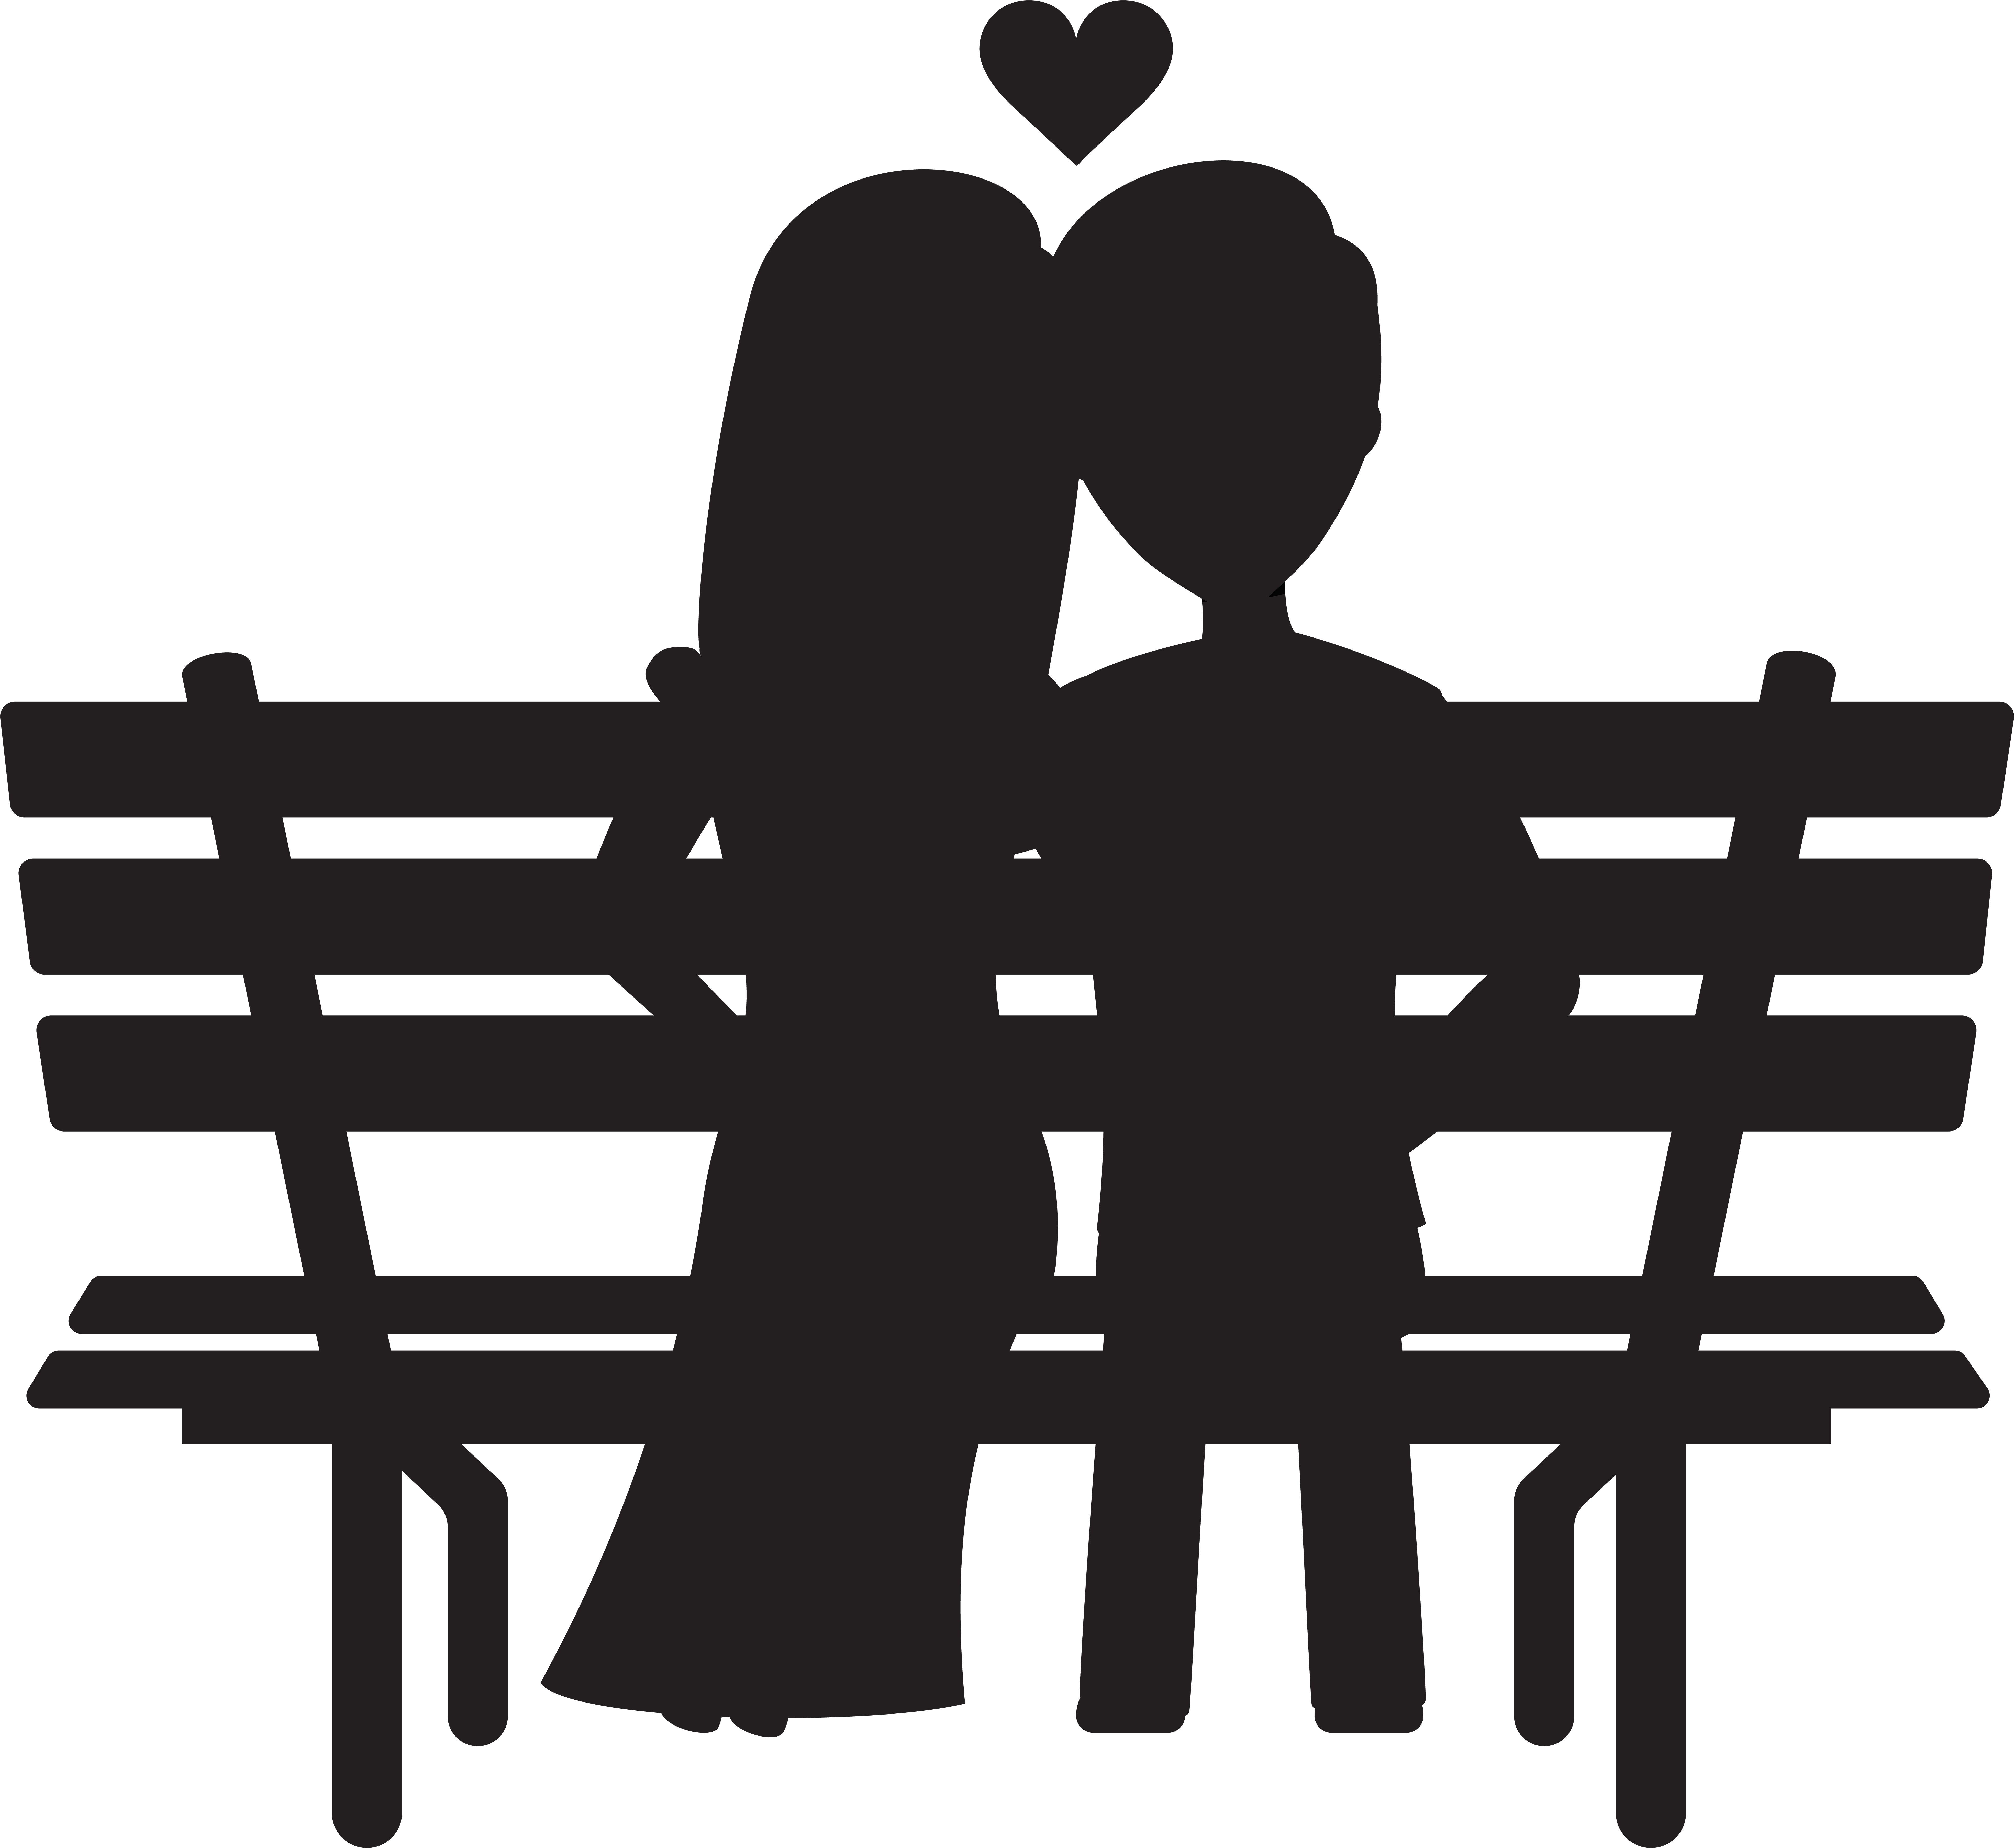 Couple On Bench Silhouettes Transparent Image Clipart.